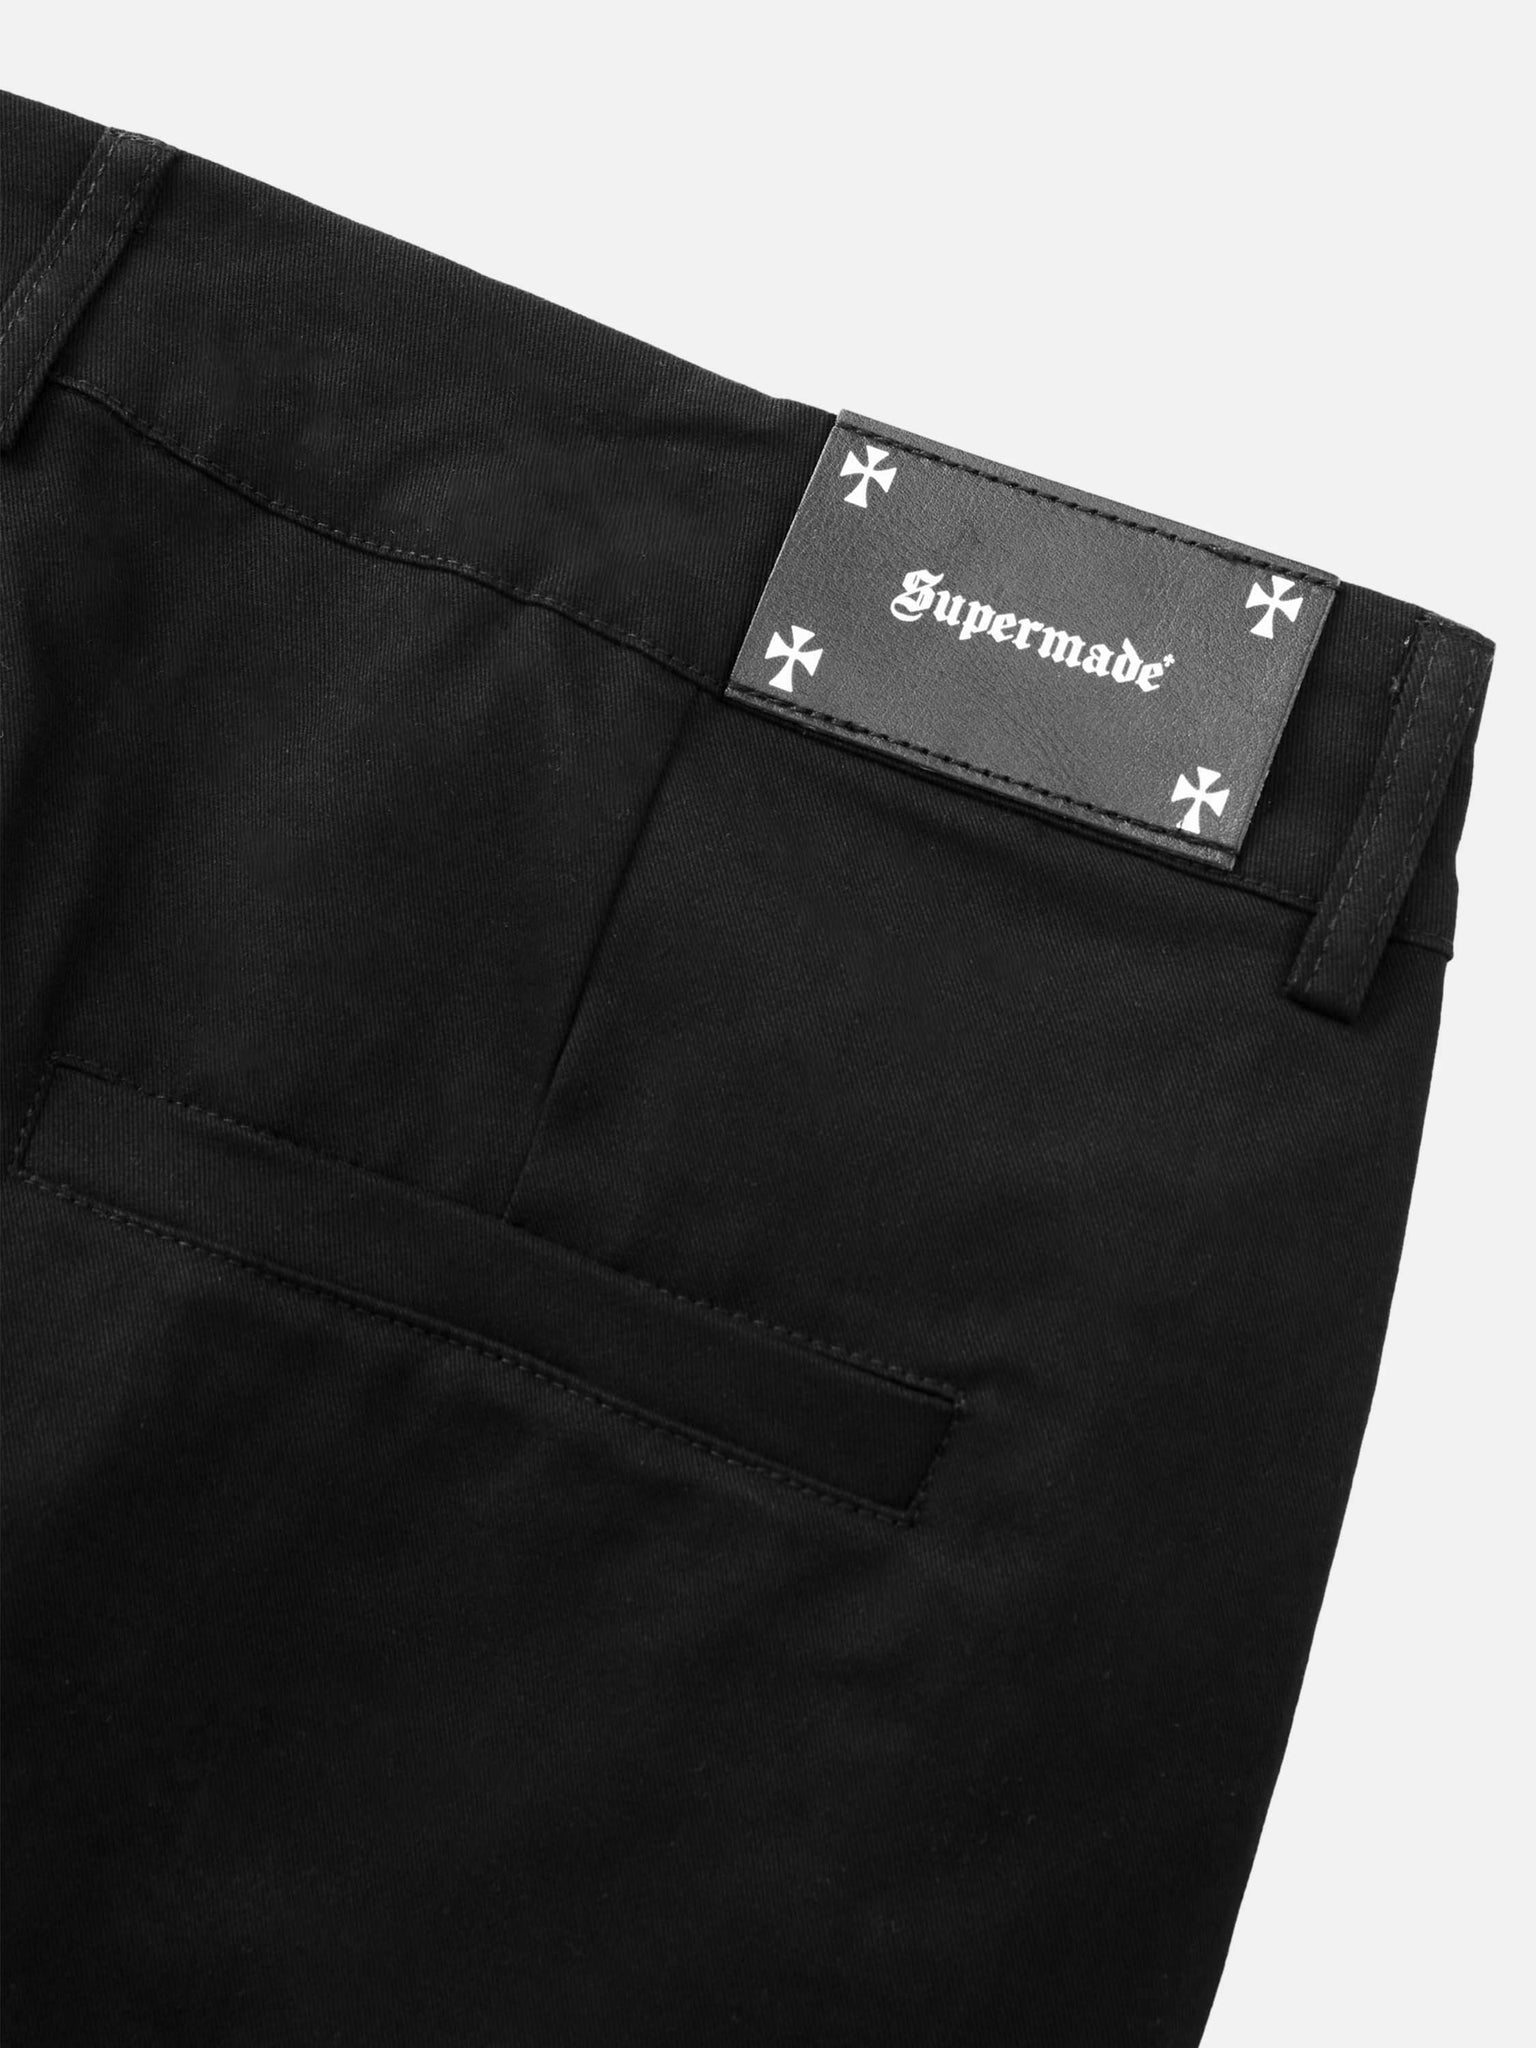 Thesupermade Creative Design Multi-Pocket Casual Pants - 1959